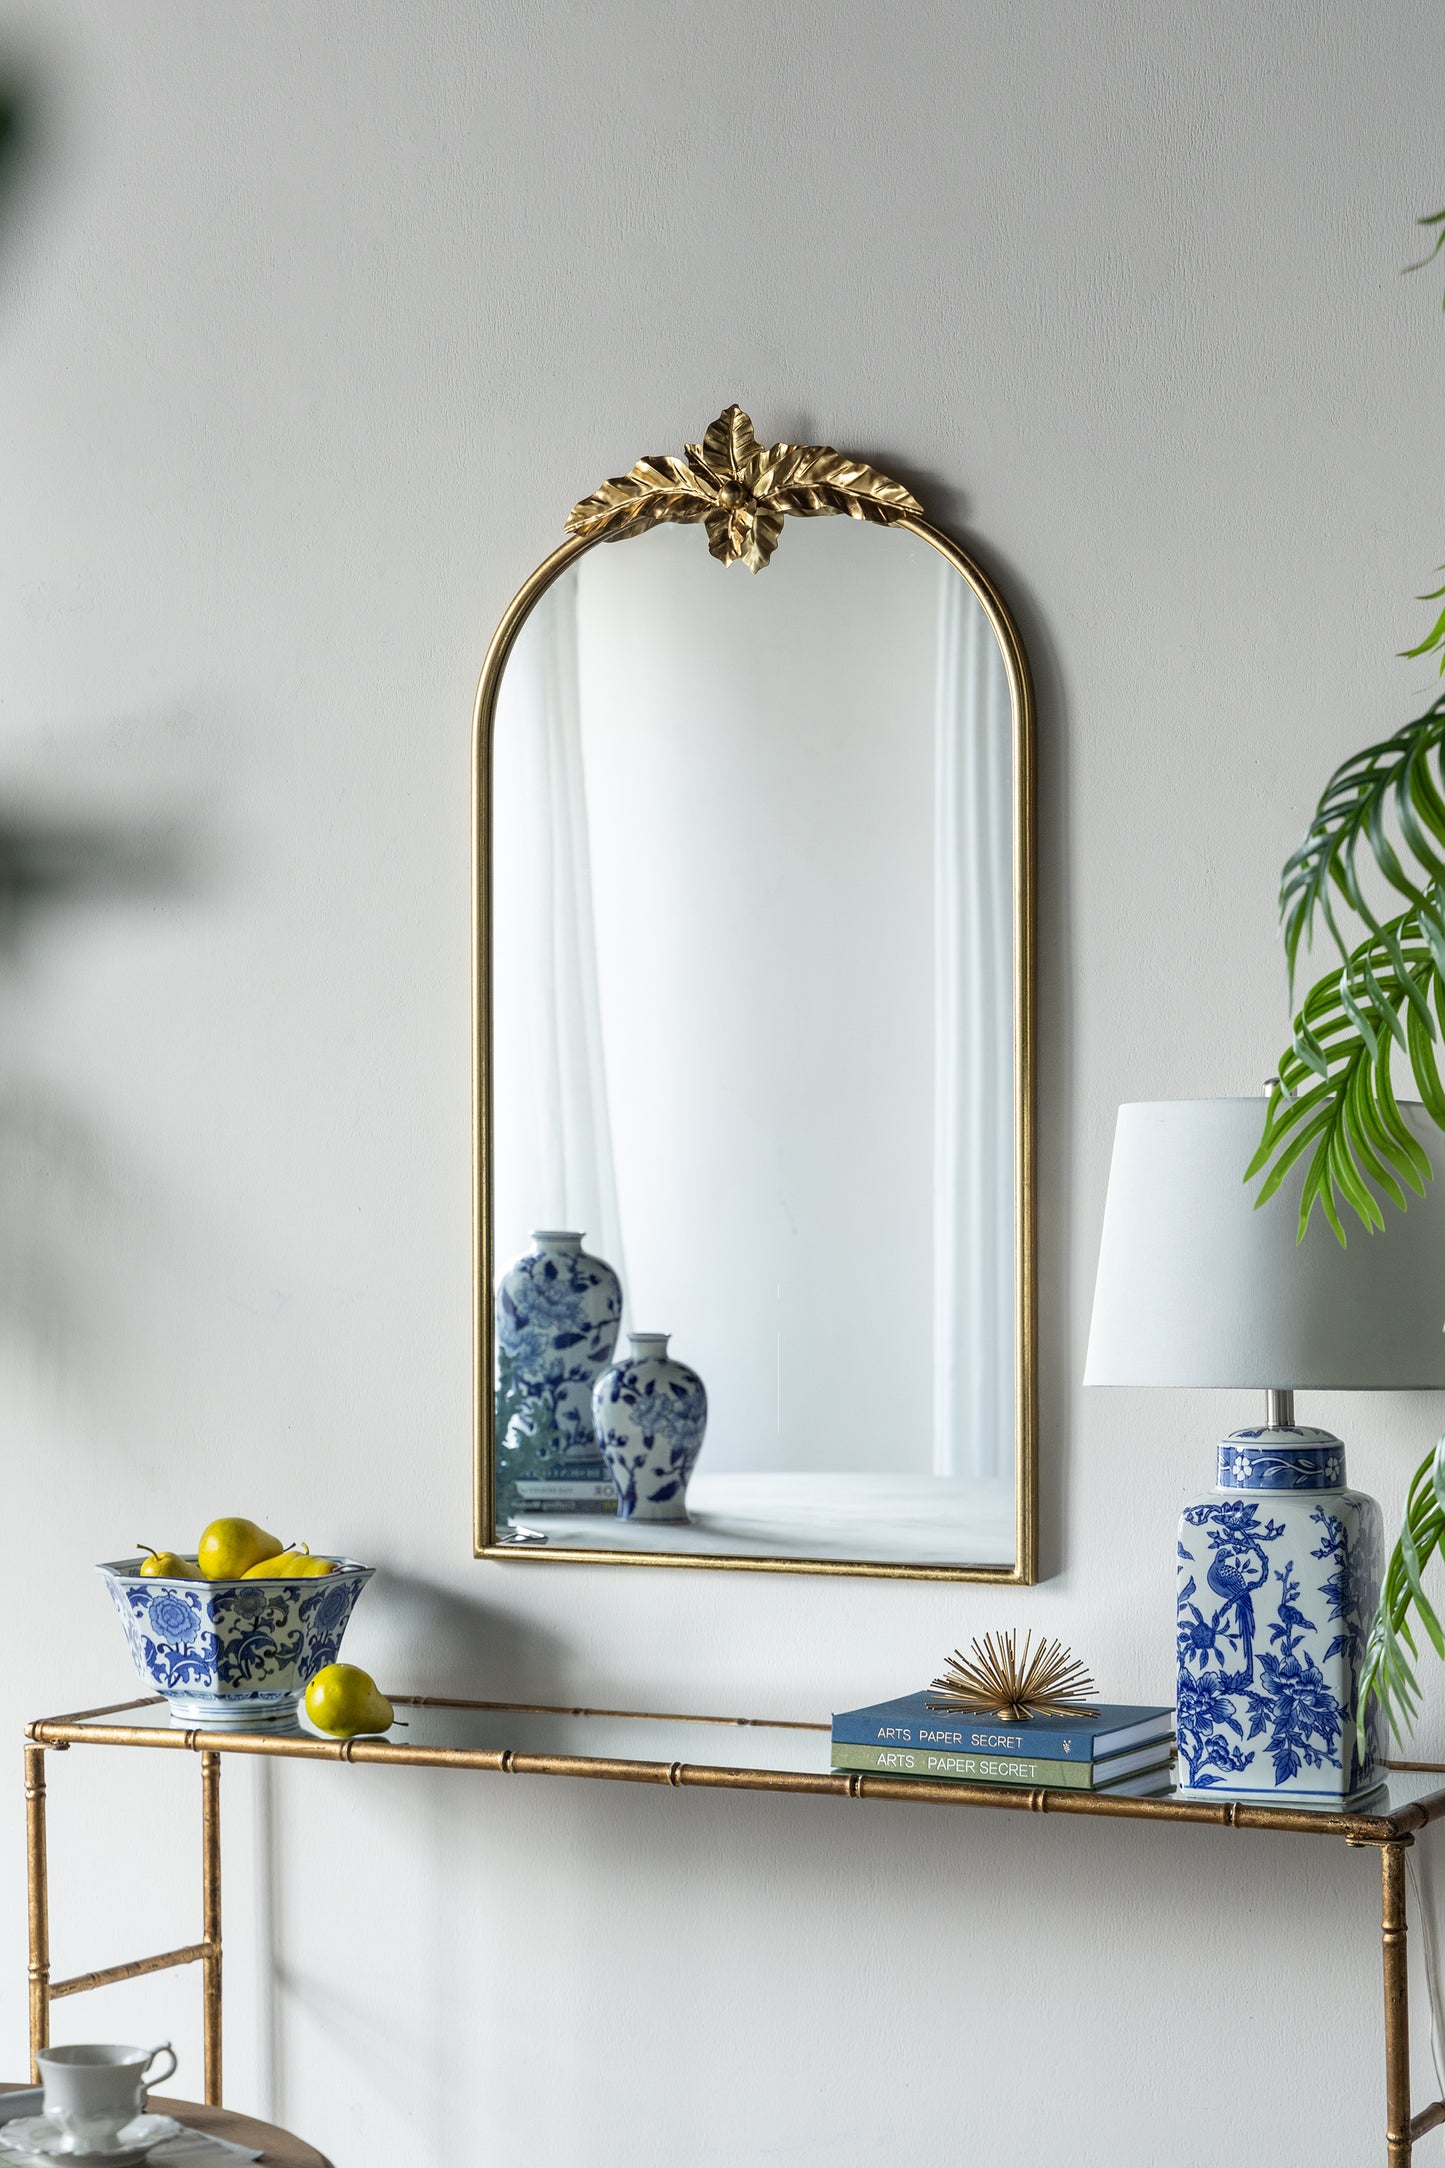 24"x42" Arched Wall Mirror with Gold Metal Leaf Frame